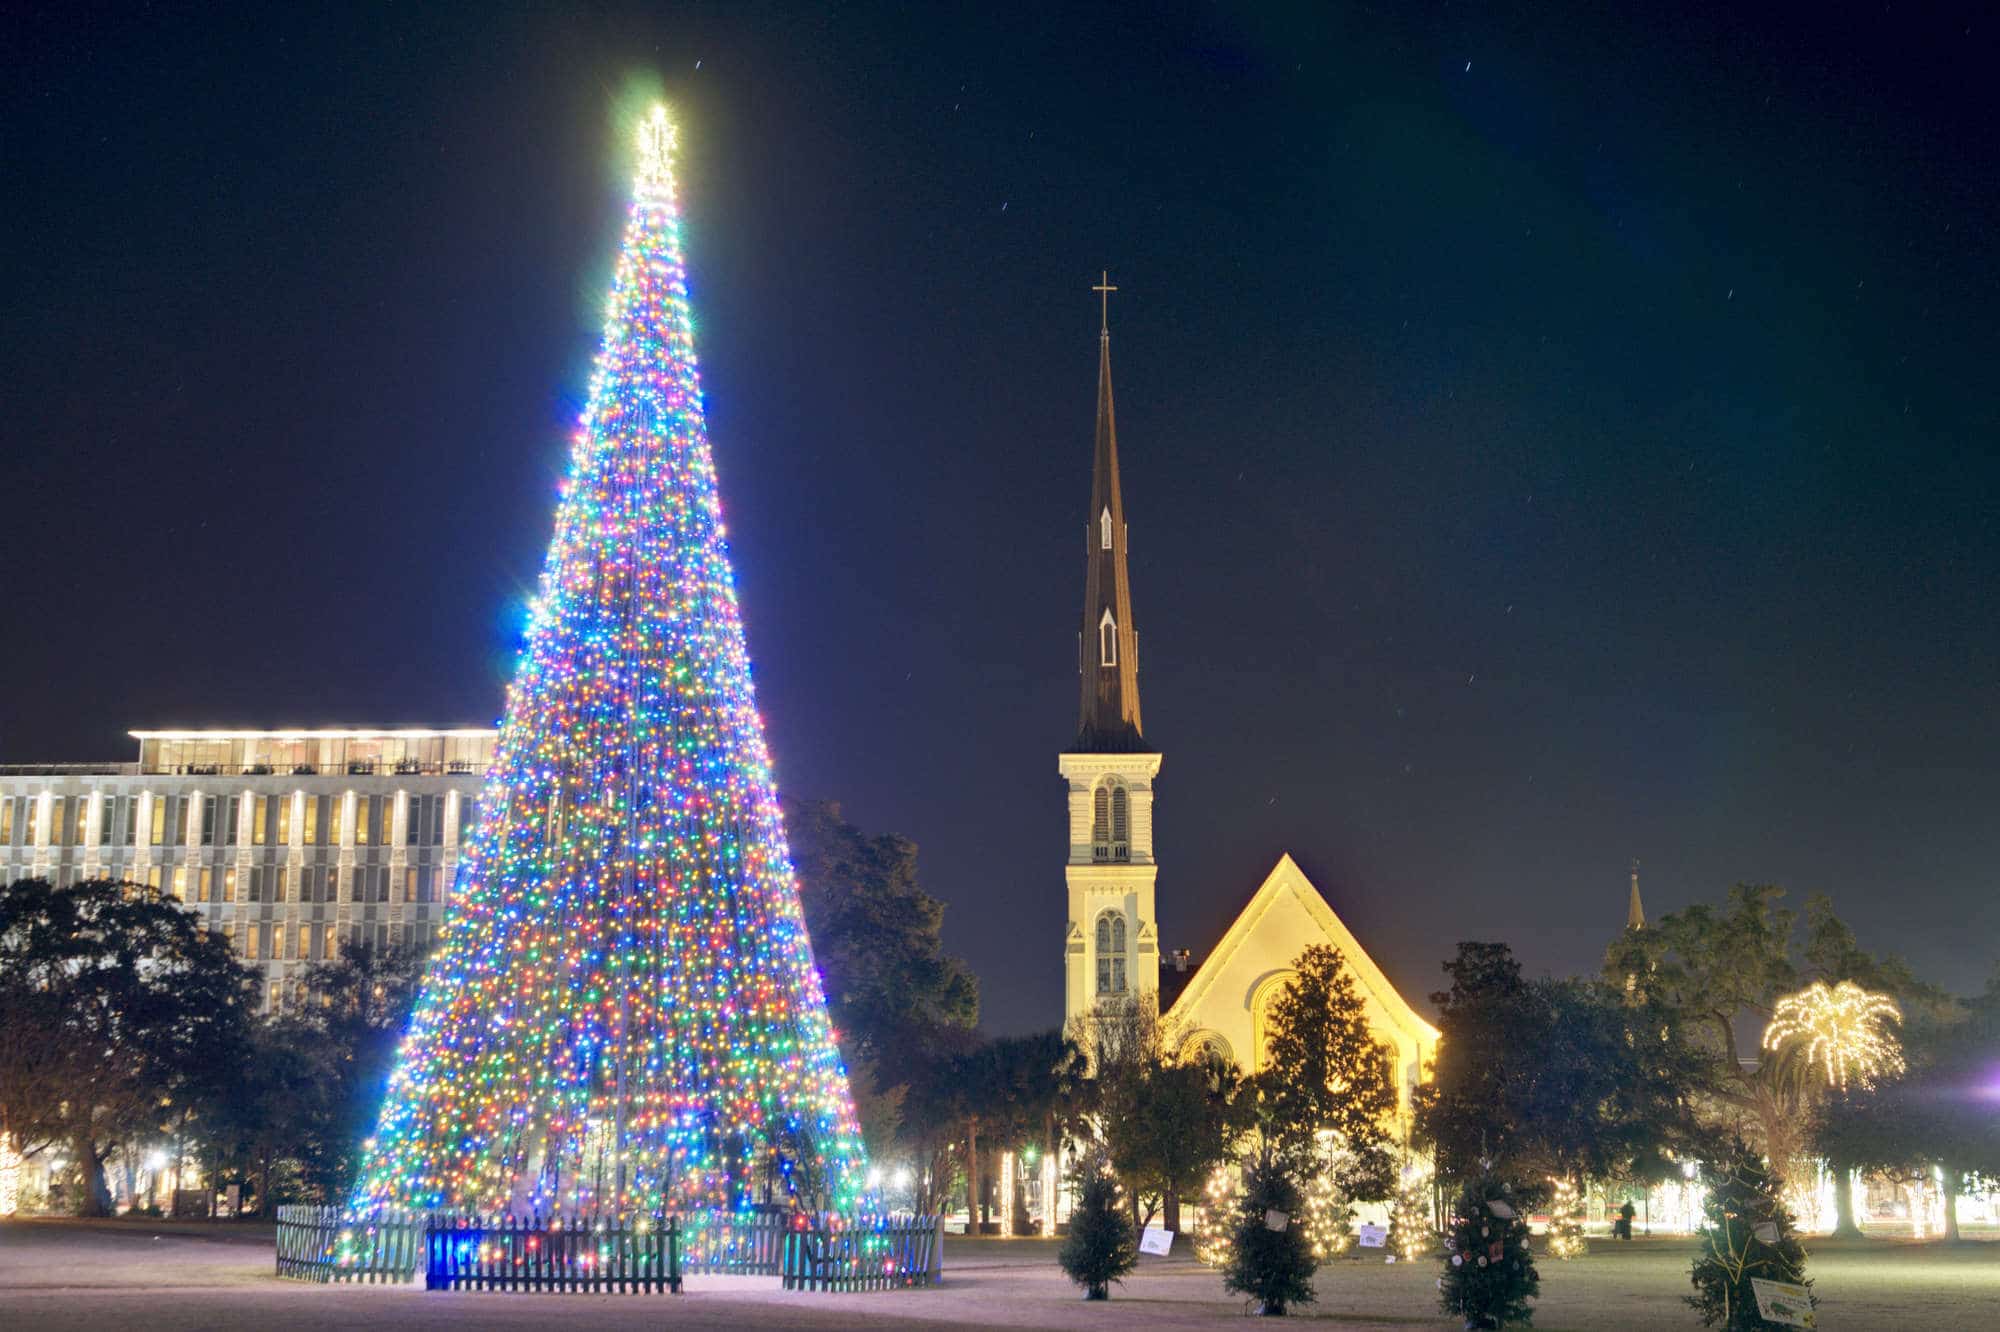 Strands of lights in a conical shape in the middle of Marion Square balance a nearby church's steeple in Charleston, South Carolina.